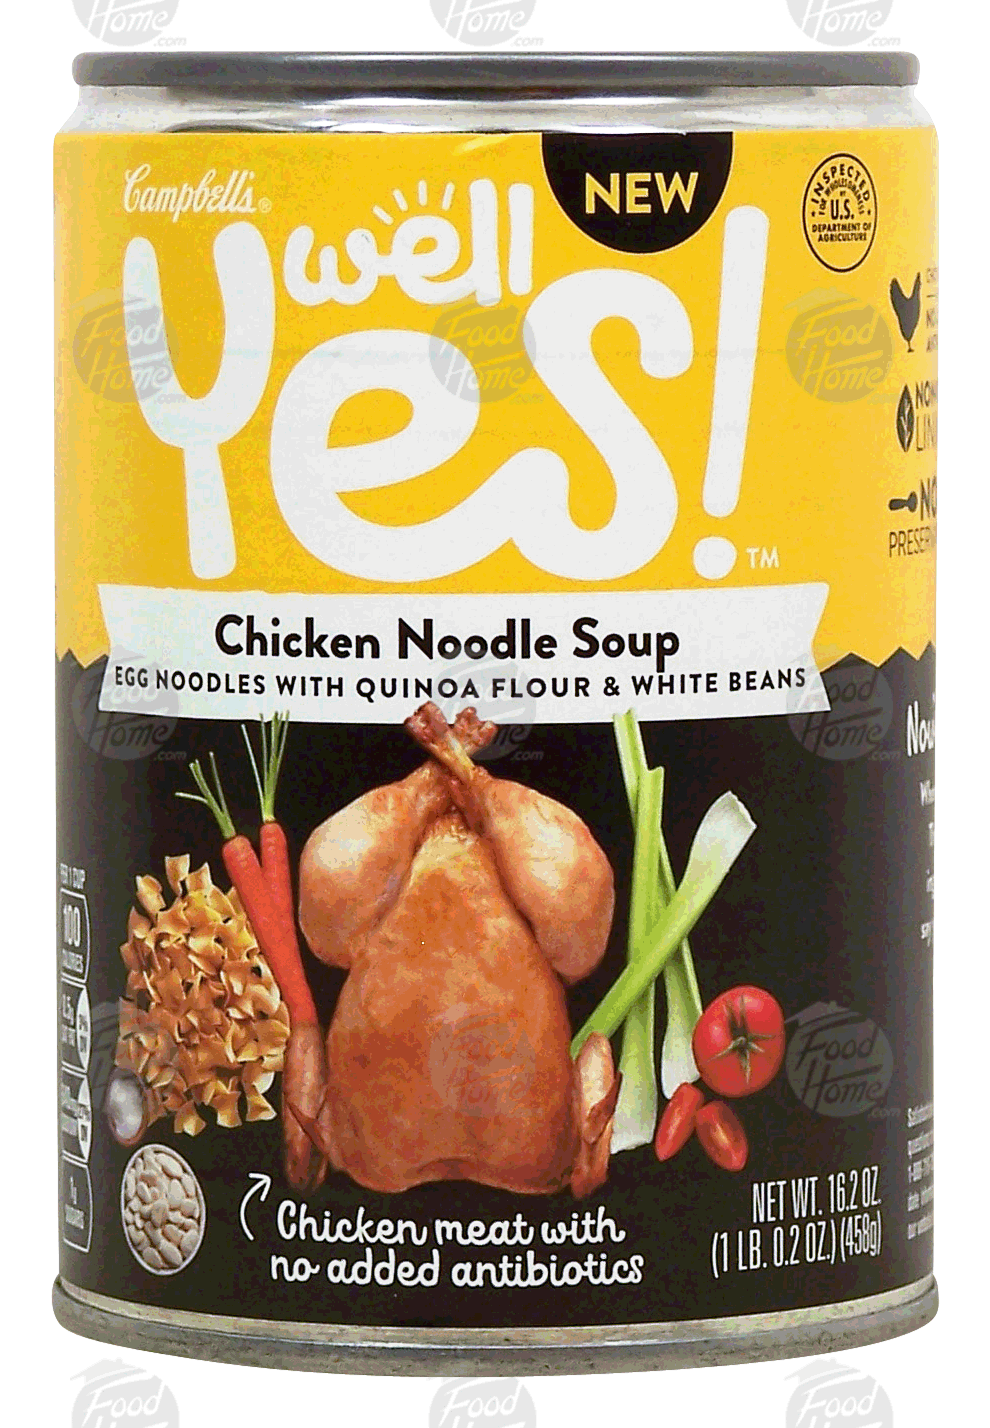 Campbell's Well Yes! chicken noodle soup Full-Size Picture